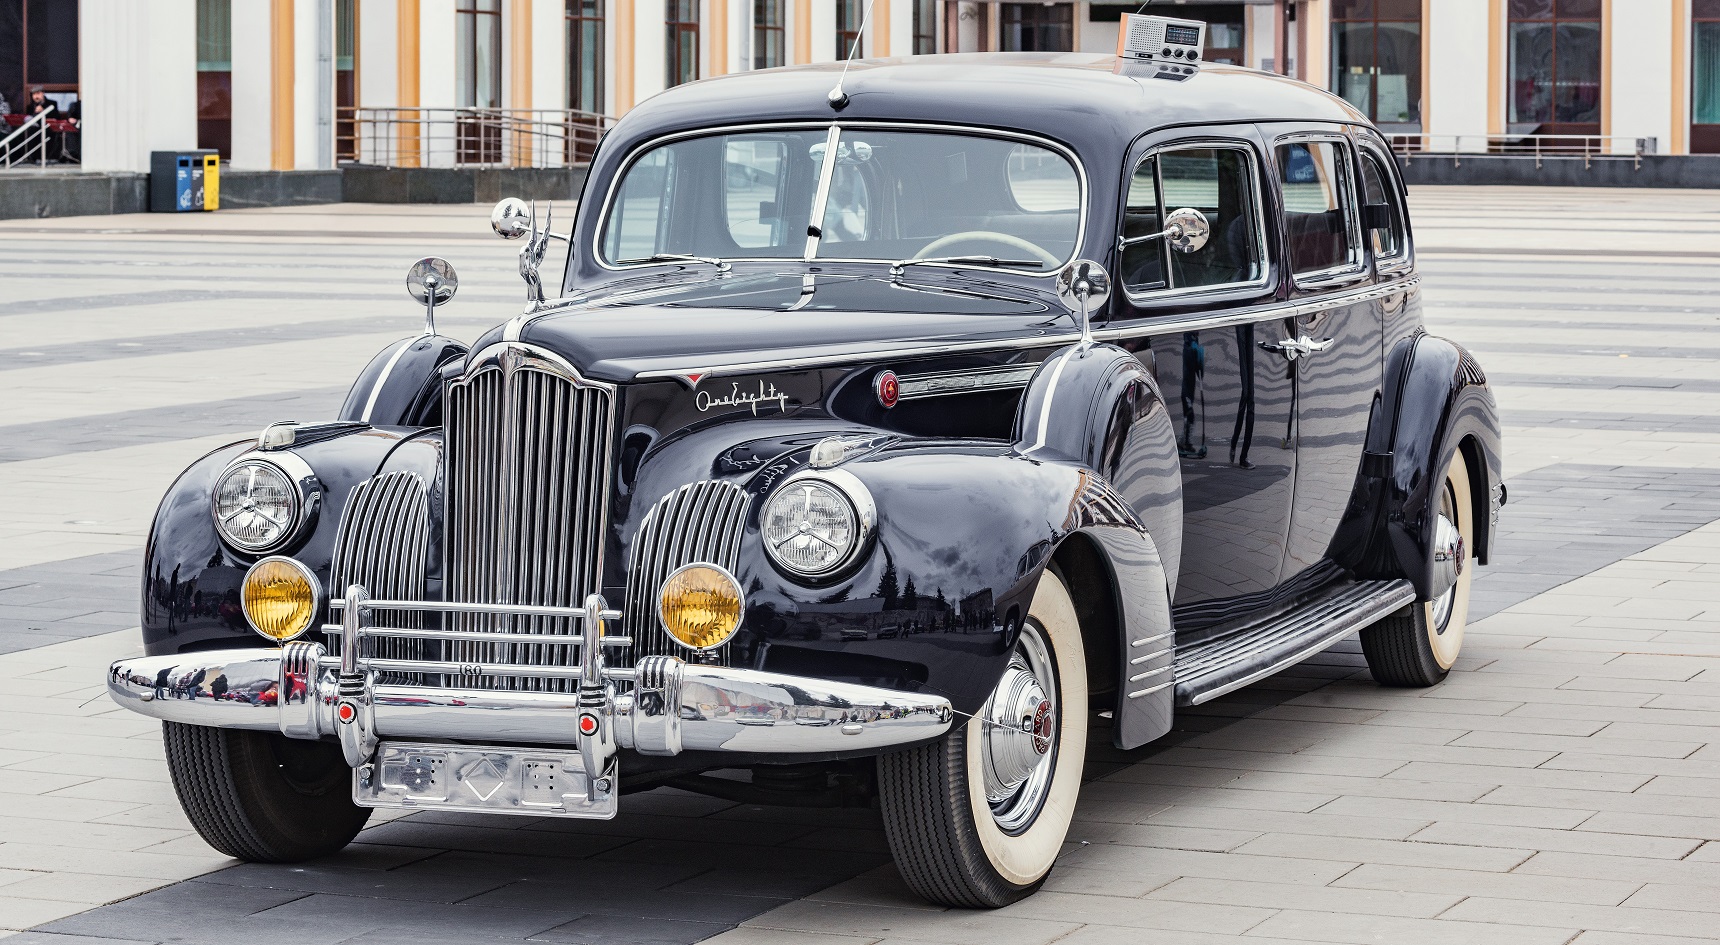 A Packard 180 on display in Russia.